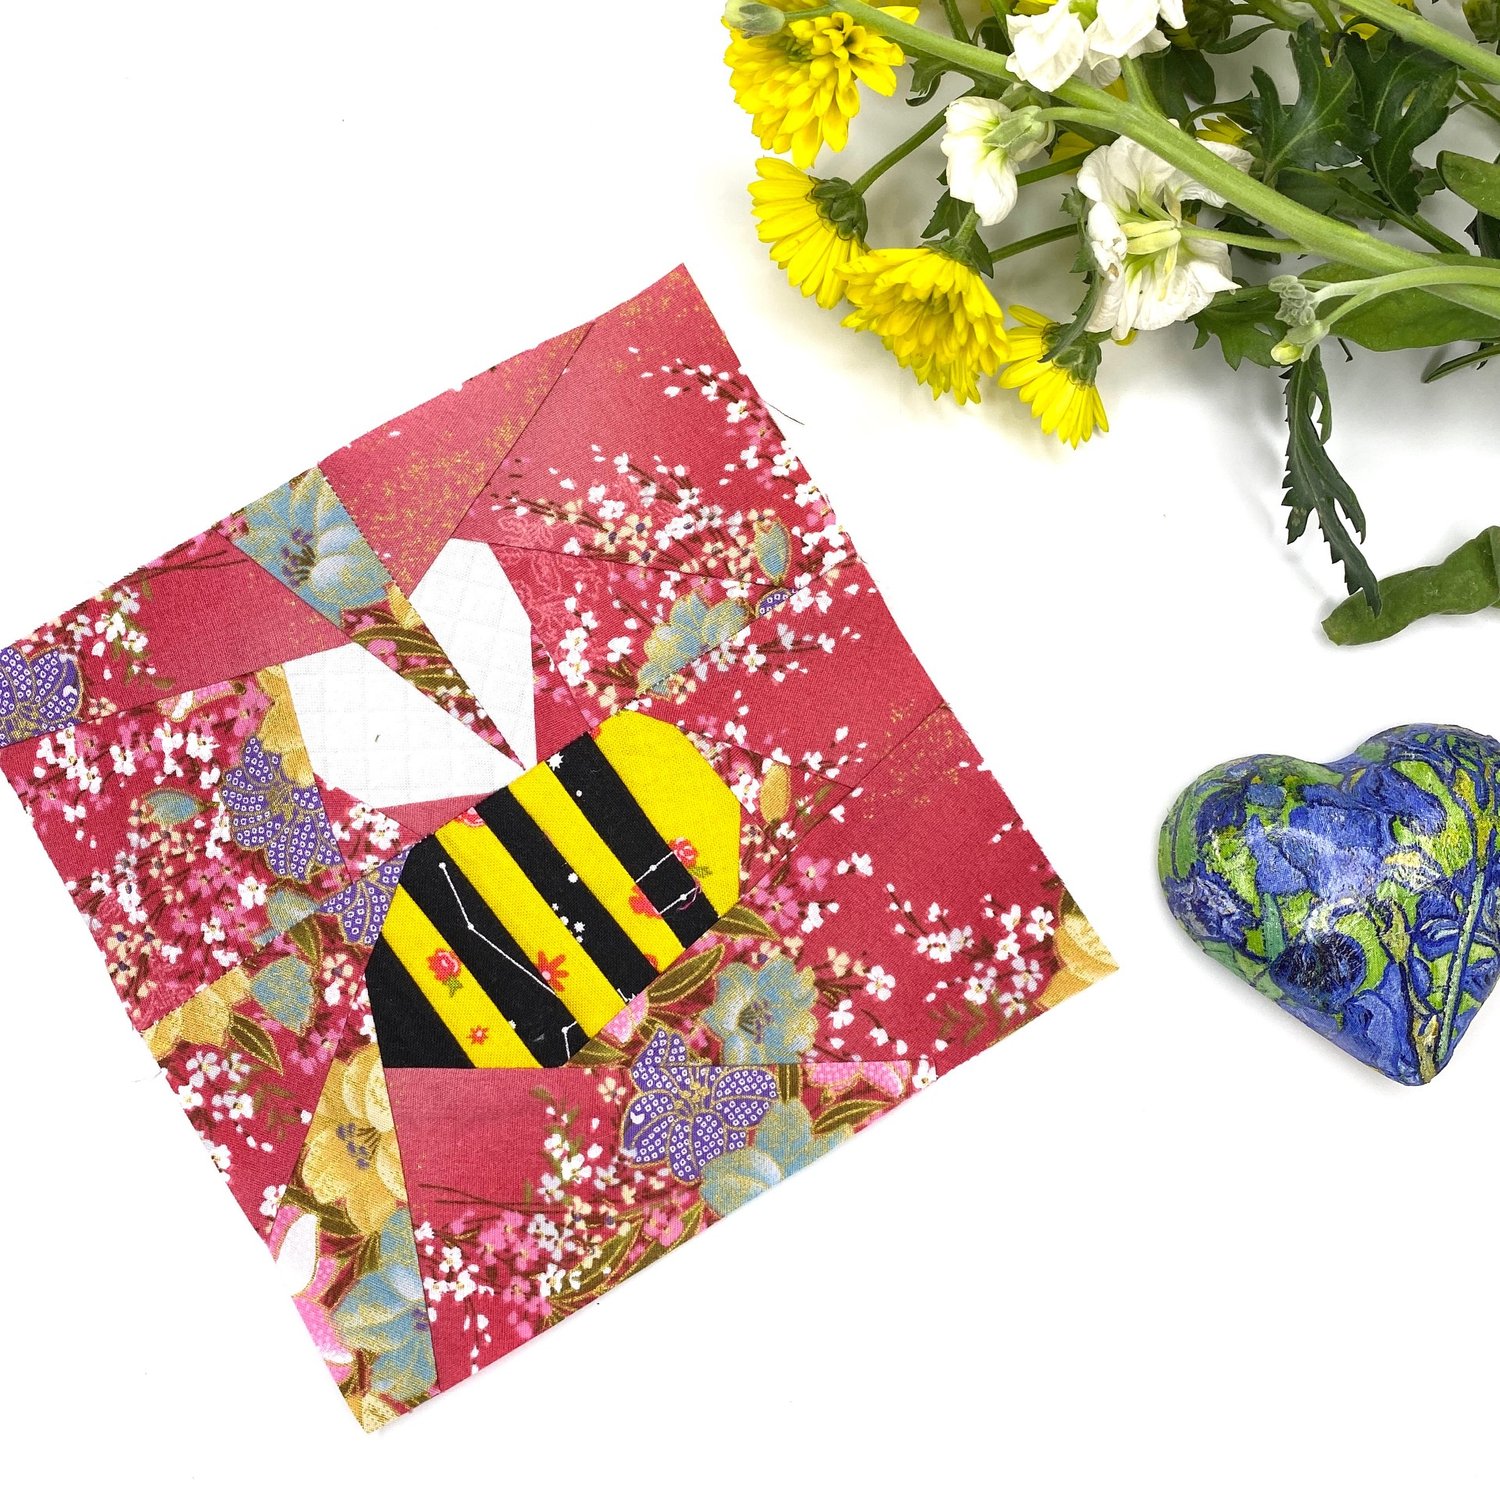 The Bumble Bee quilt block pattern is great for beginner quilters.